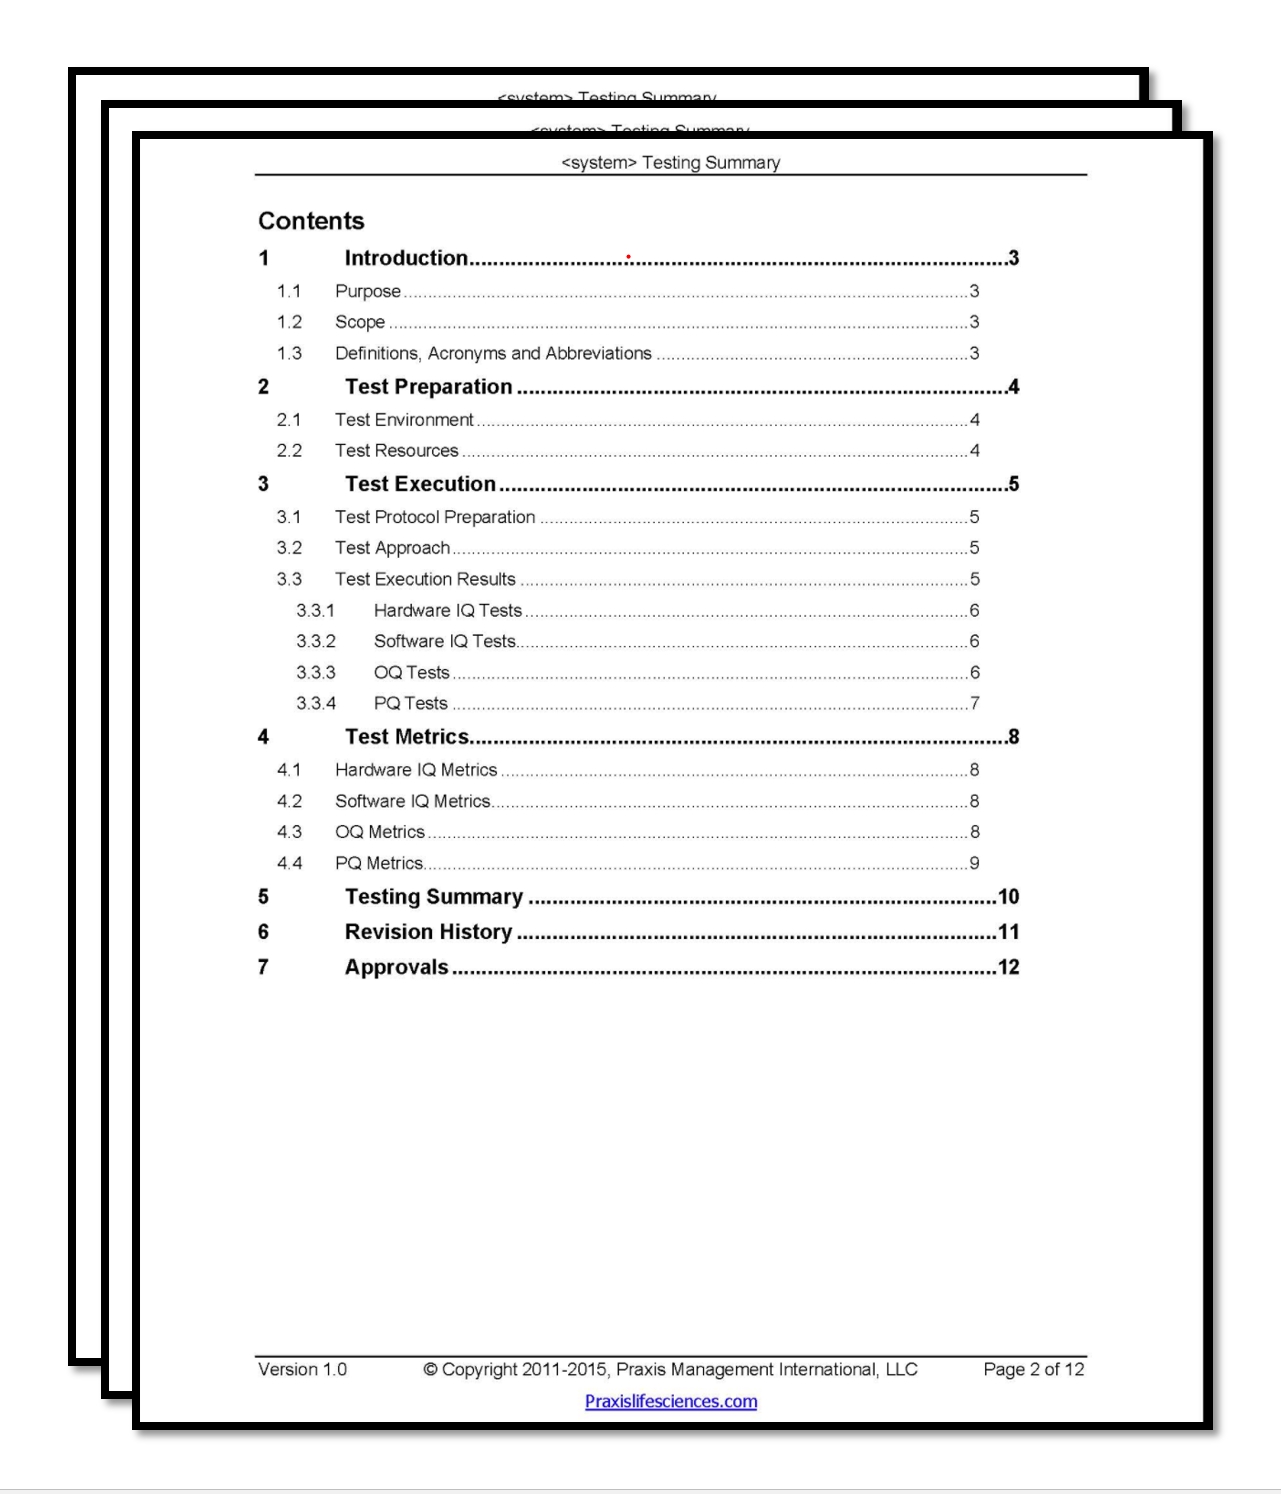 Sample Test Summary Report Template | The Document Template With Regard To Test Summary Report Template